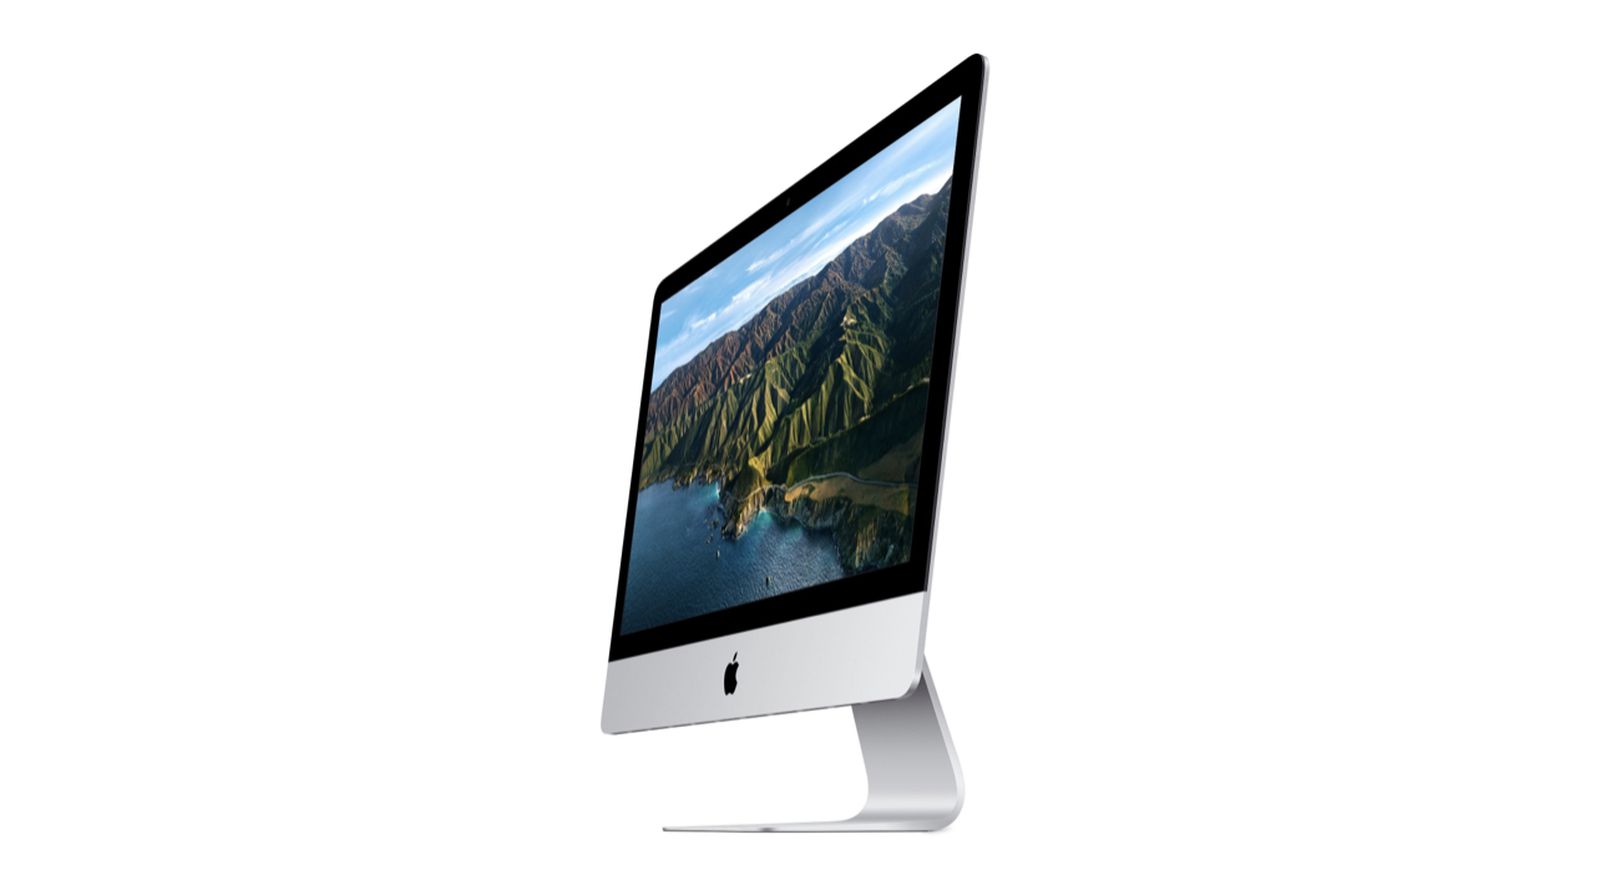 Availability of 21.5-inch Dwindling iMac at Apple stores